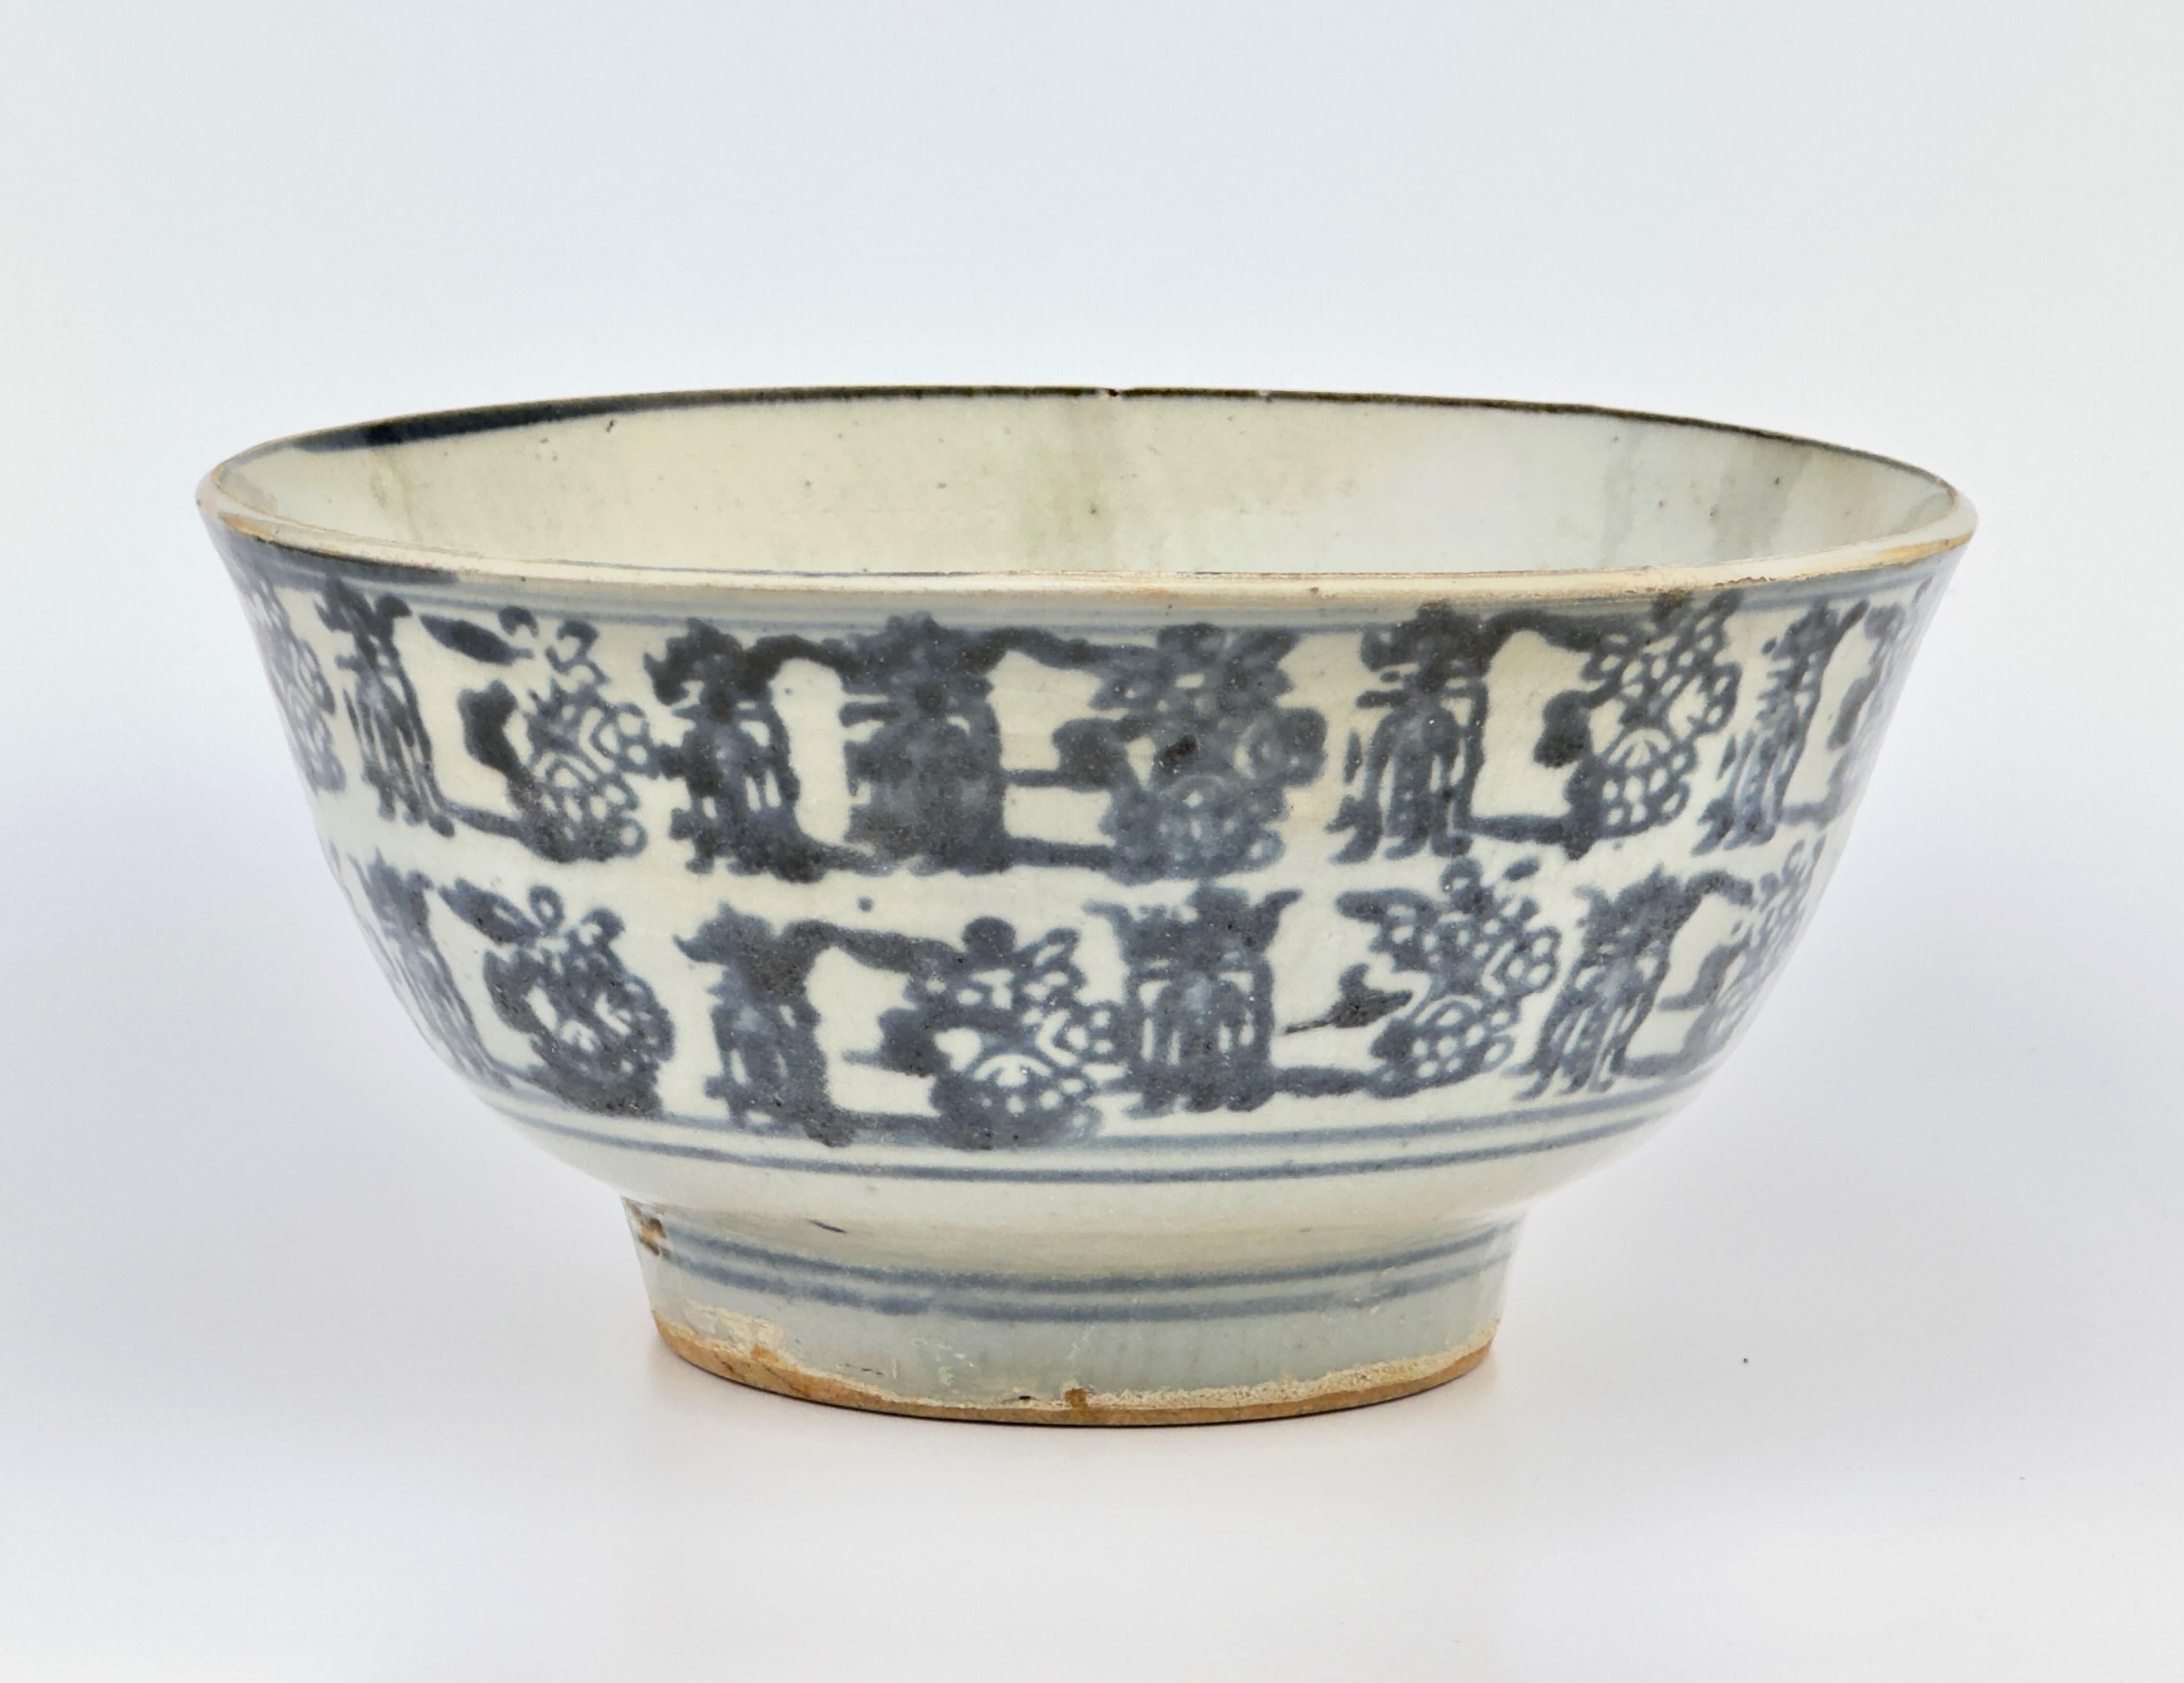 This impressive, large-sized circular bowl, featuring hues of blue and white, showcases decoration through a block print technique. It is adorned with two horizontal bands of shou characters, which alternate with intricate floral motifs, all set